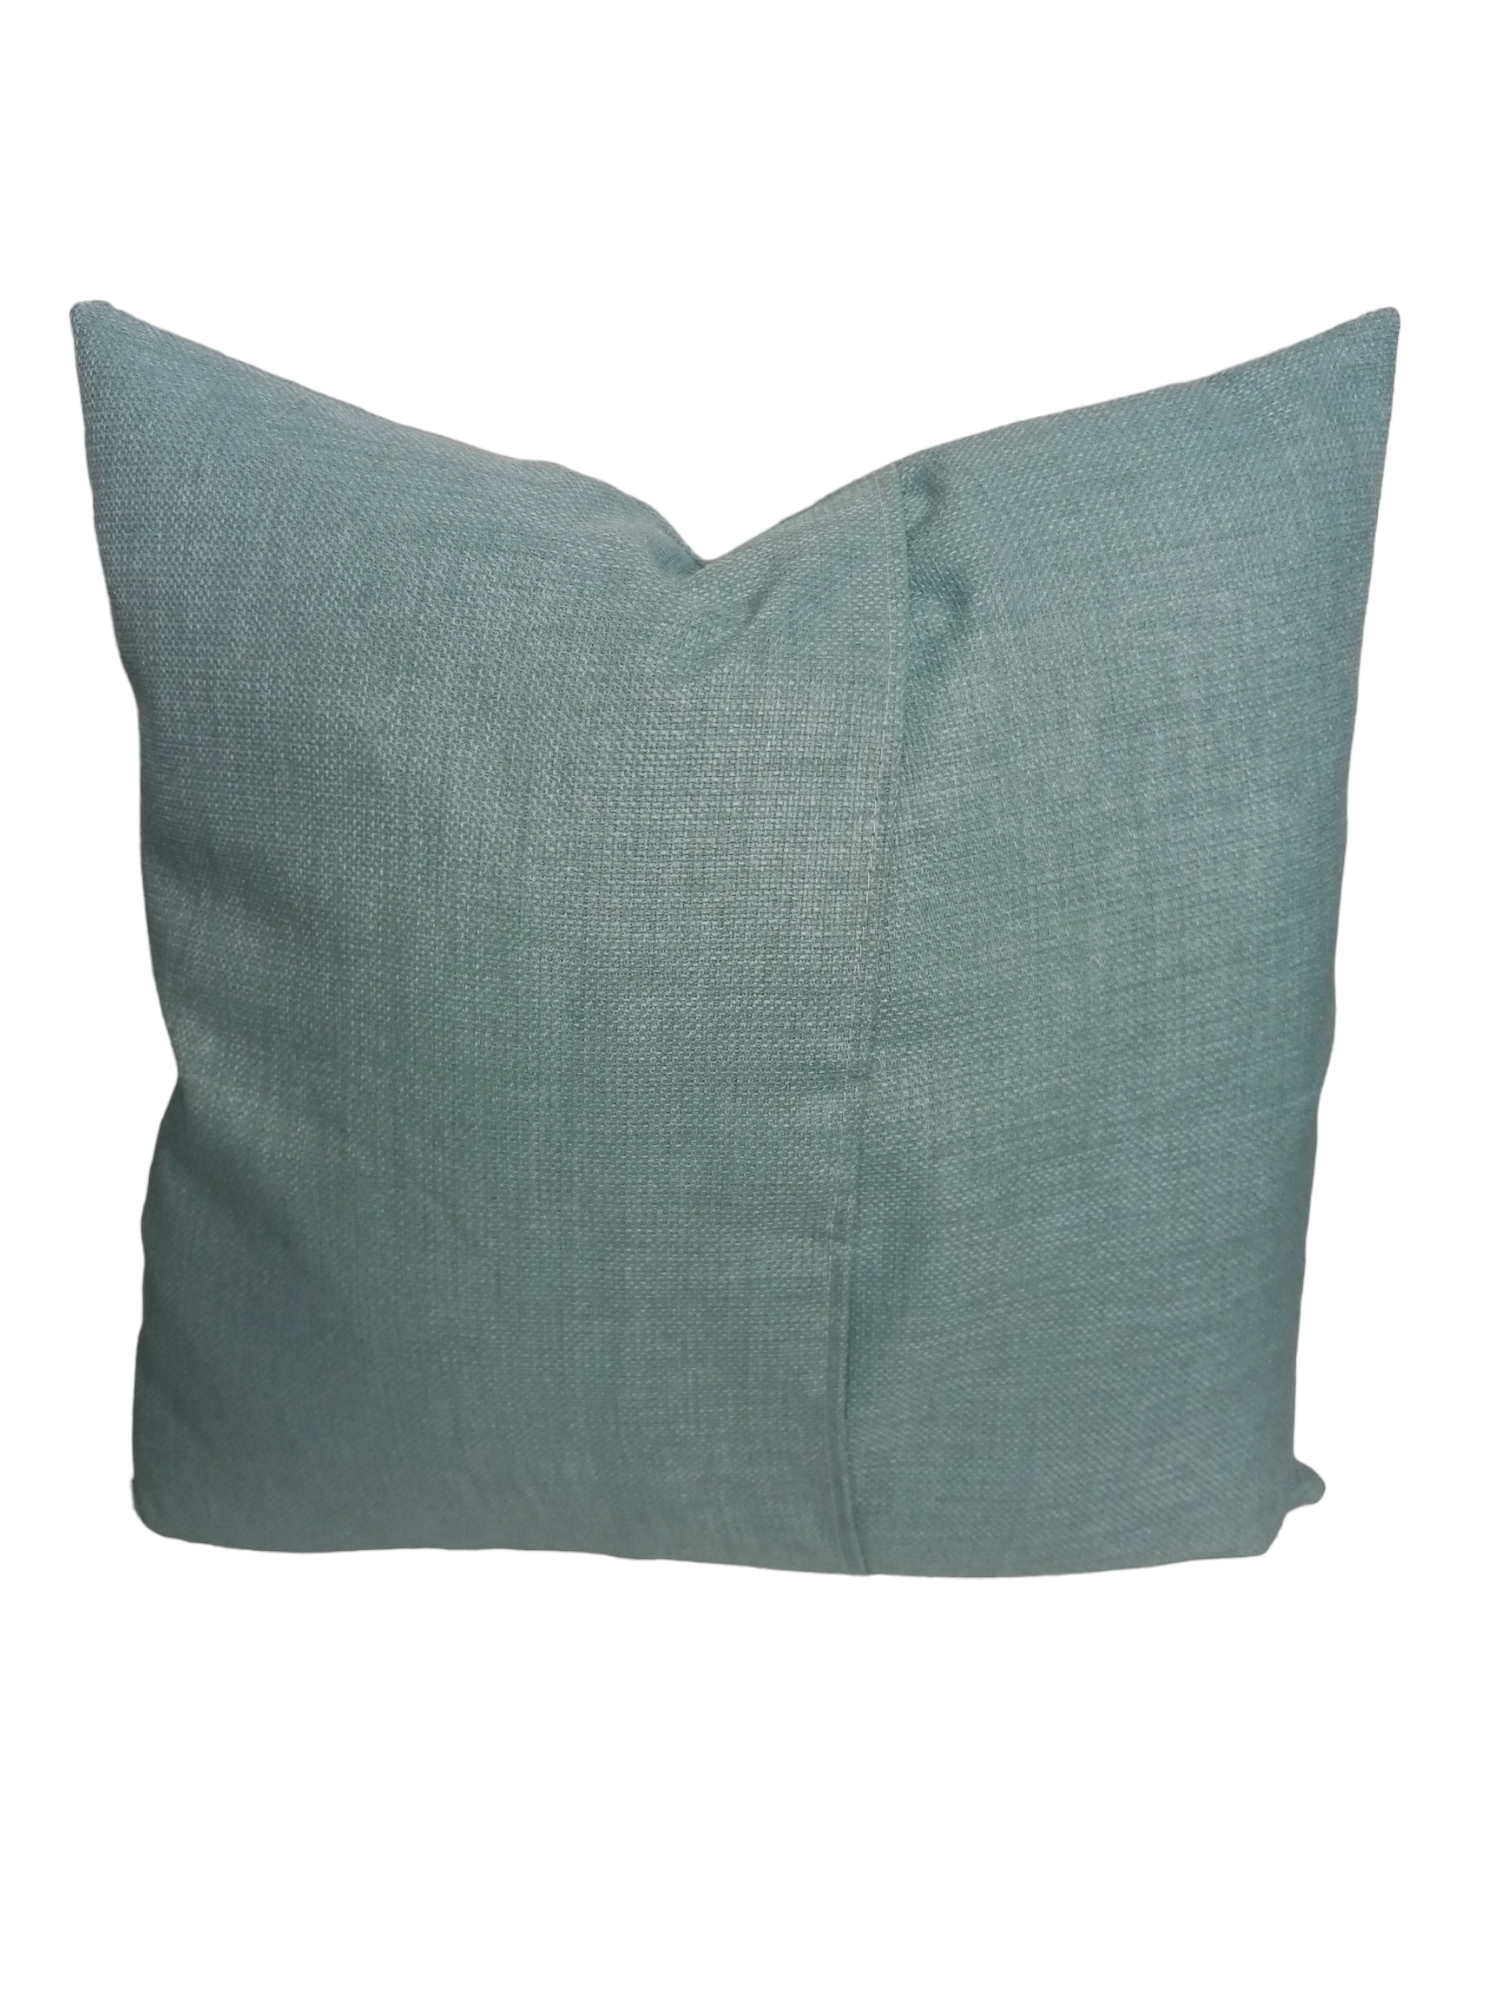 Rave Haze Water Resistant - Indoor/Outdoor Throw Pillow Cover - Blue Collection